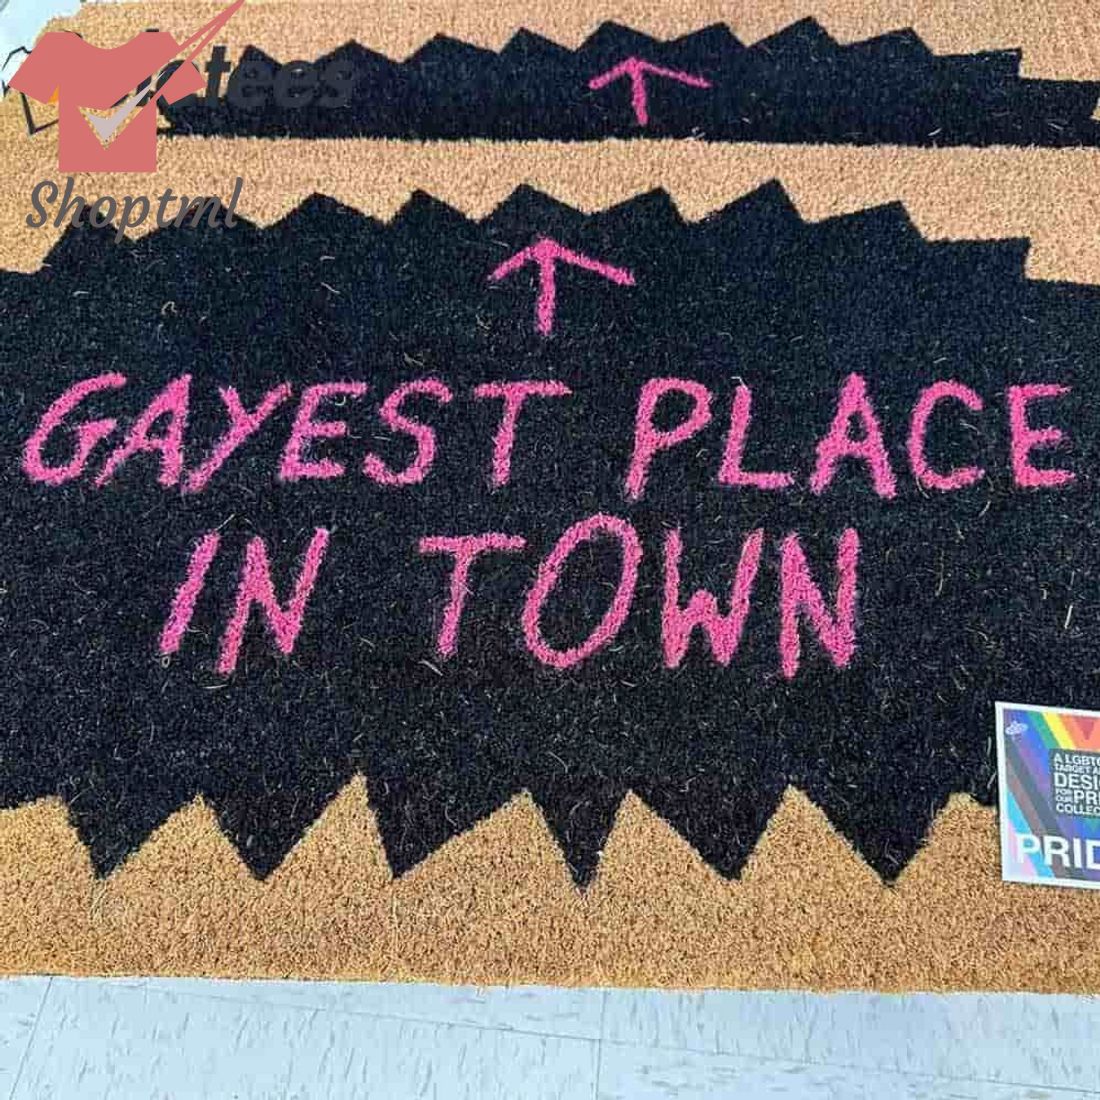 LGBT Pride Gayest Place In Town Doormat